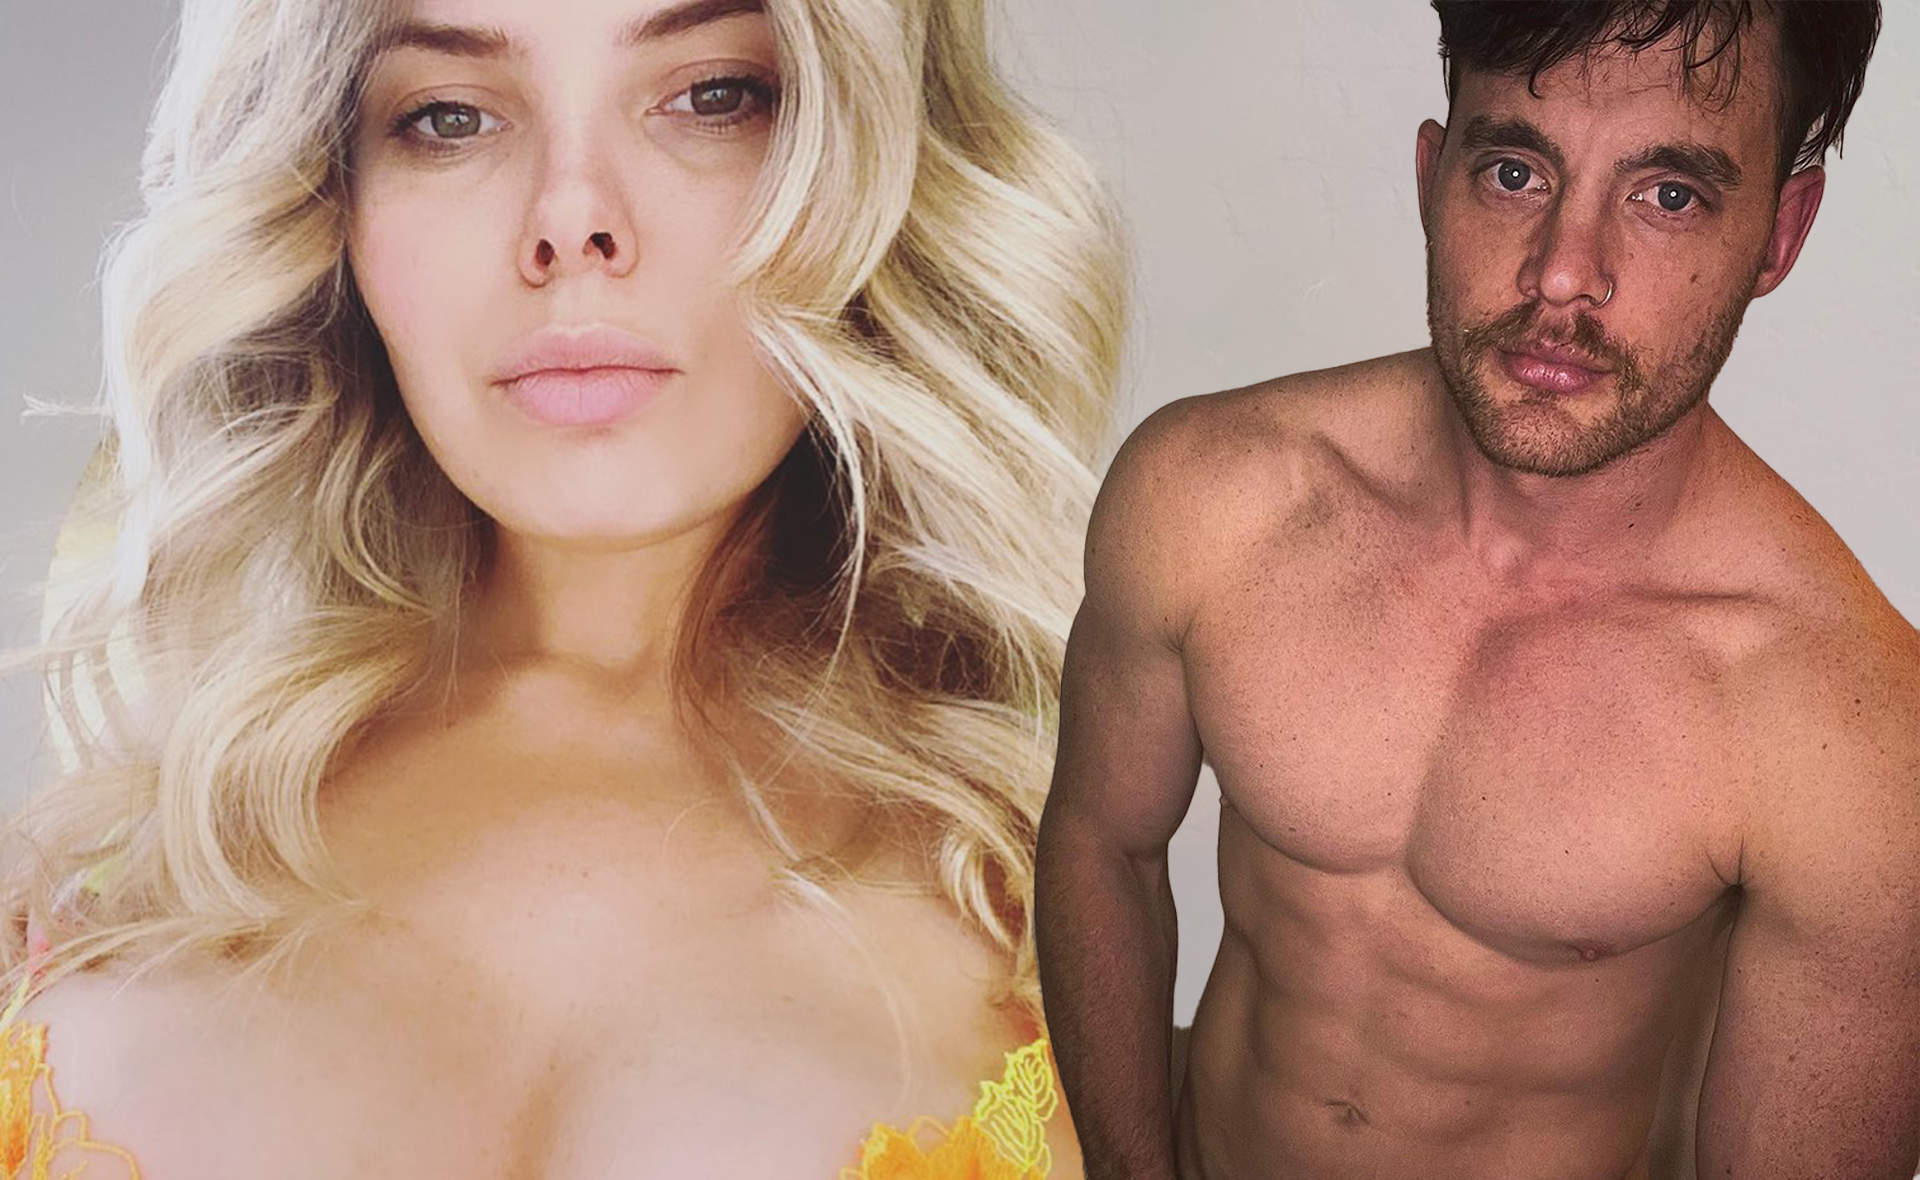 Olivia Frazer’s surprising OnlyFans confession days after split from Jackson Lonie: “Not the man for me”